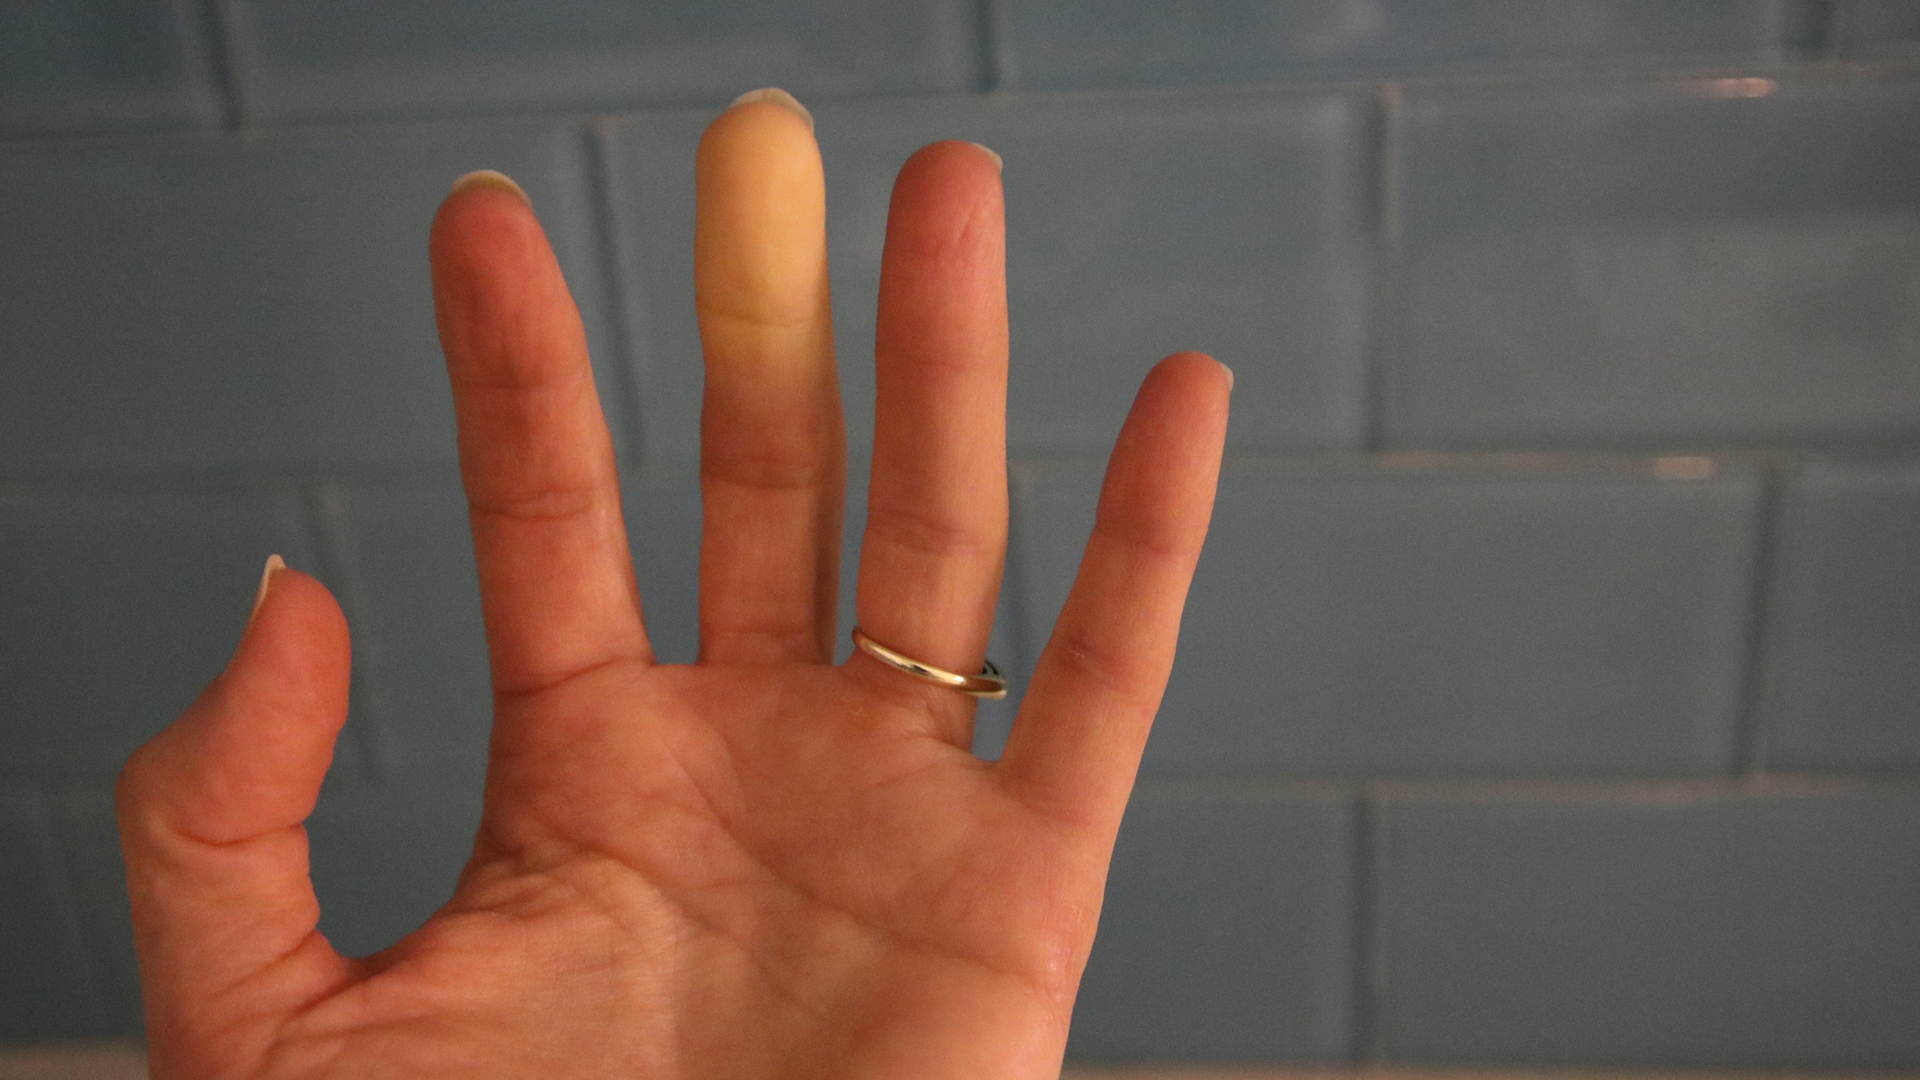 women with Raynaud's disease showing bad circulation